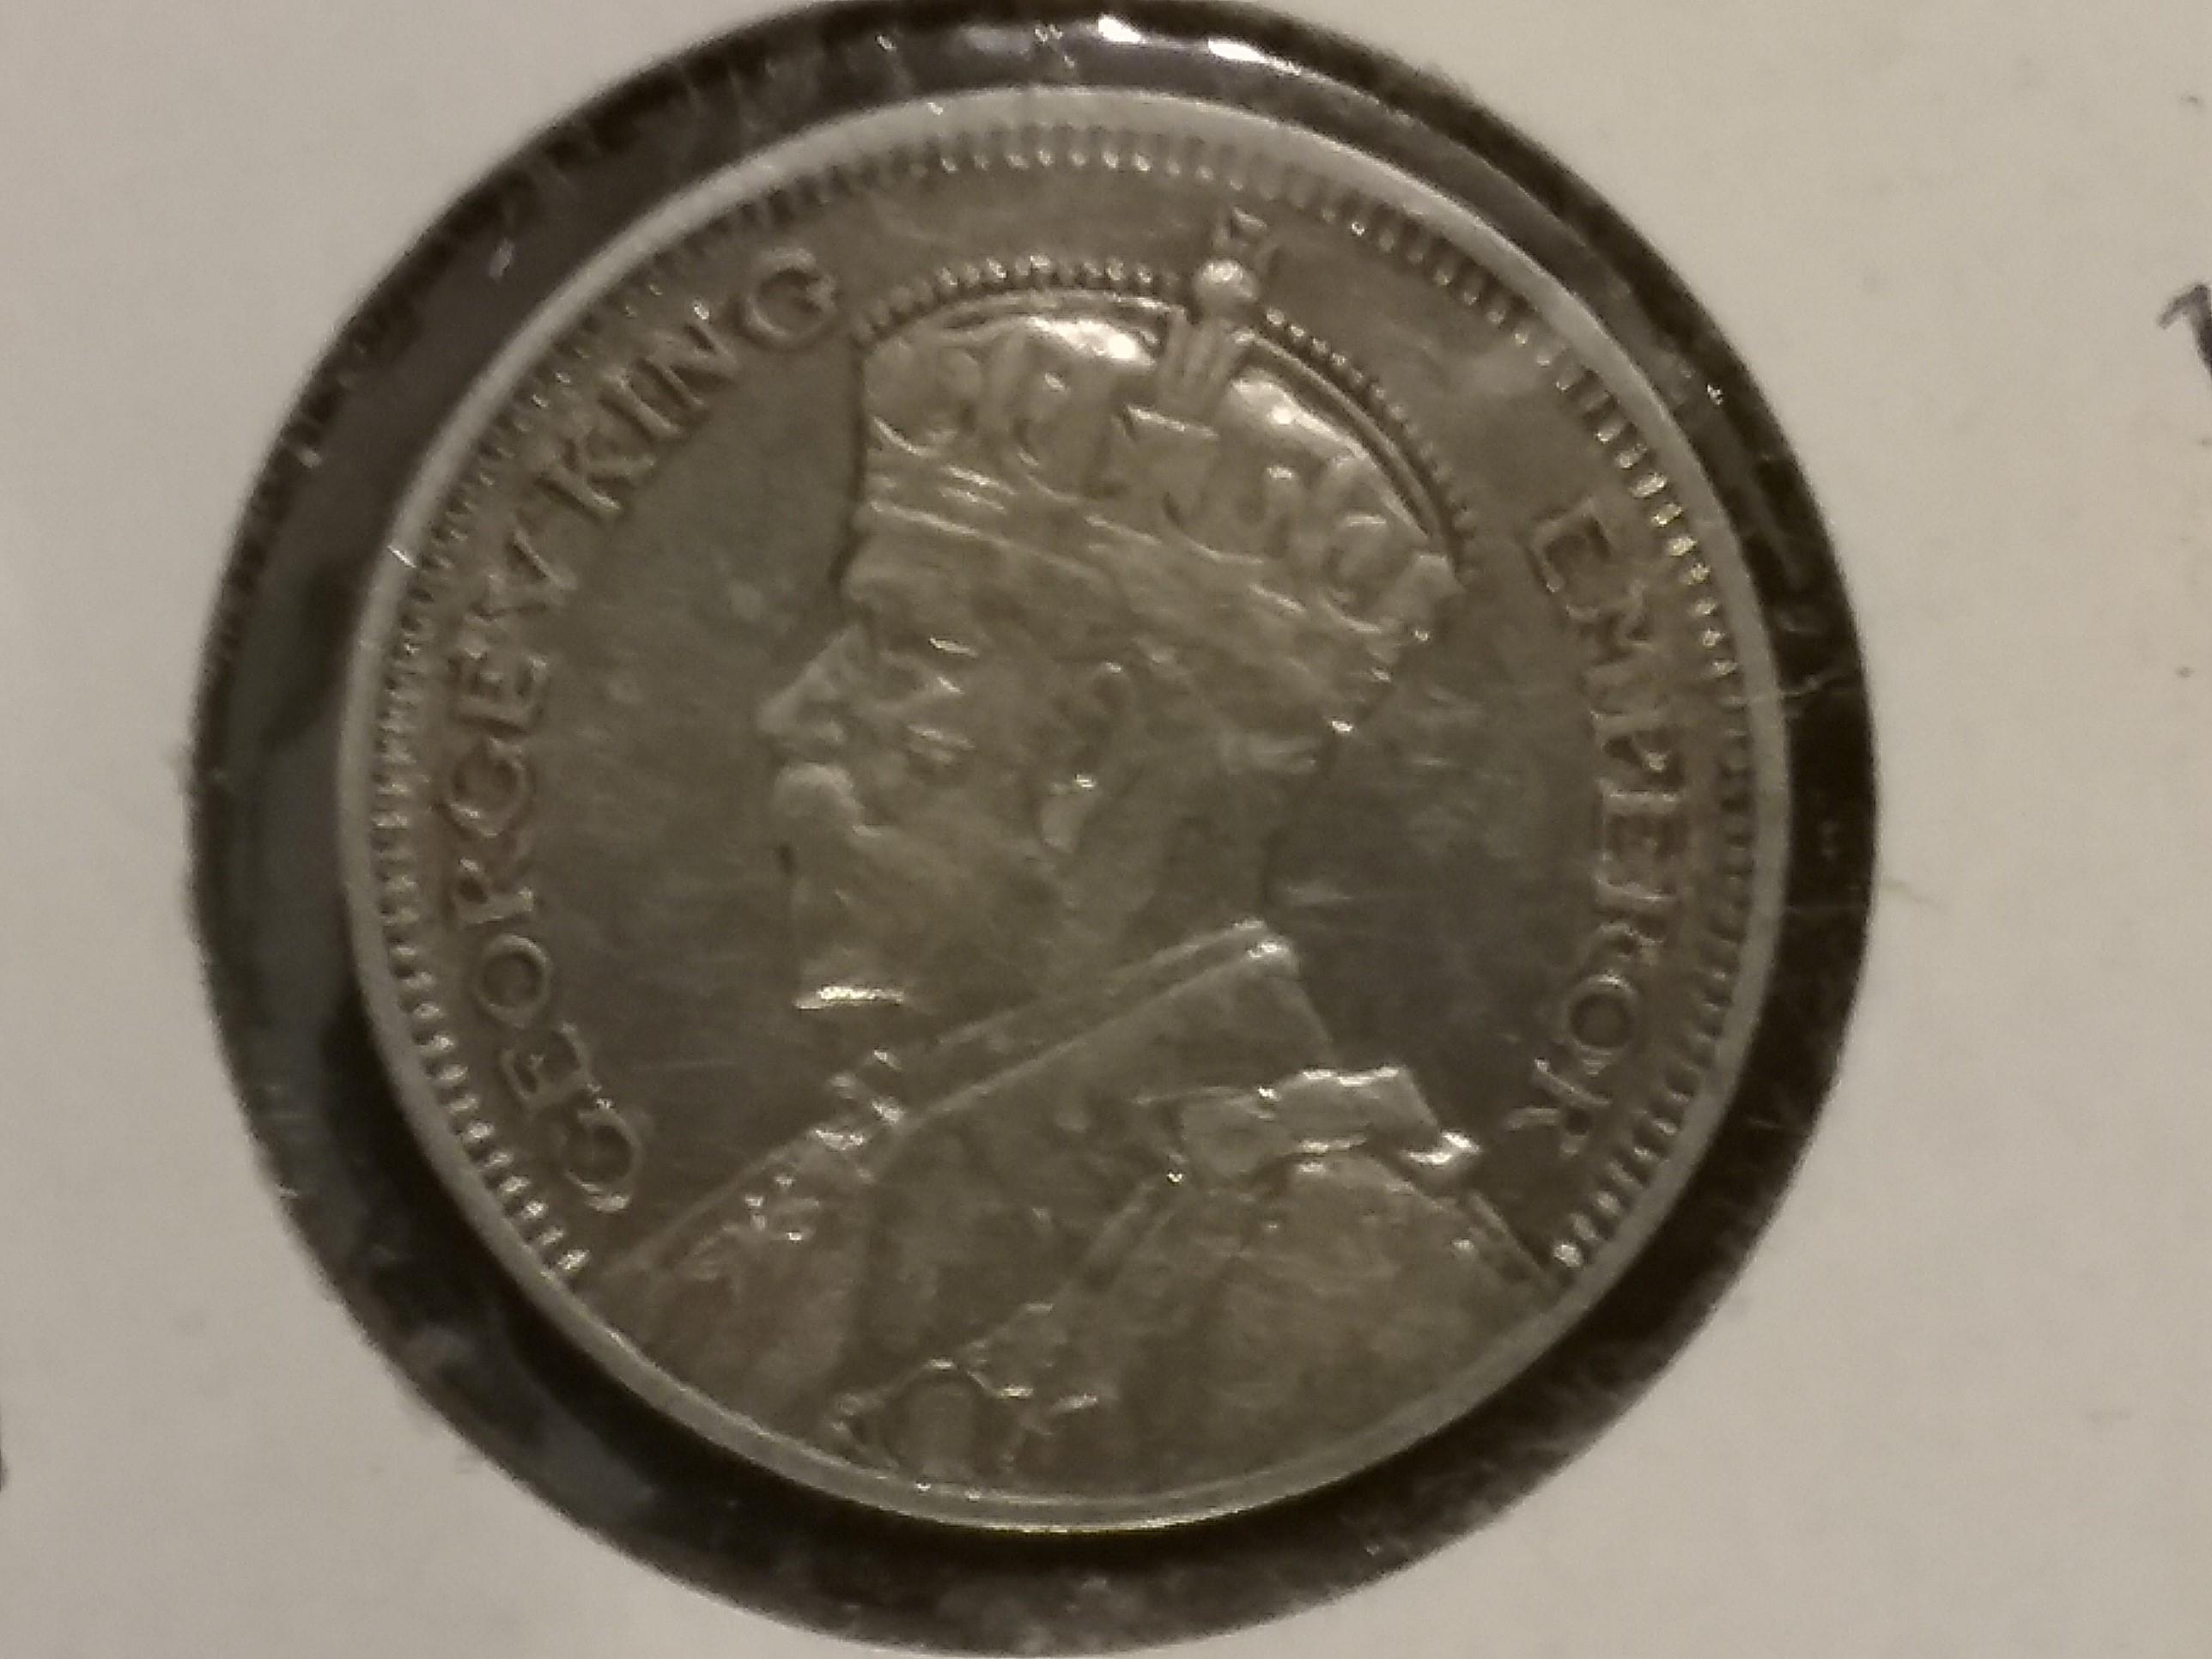 1936 New Zealand Silver 6 pence